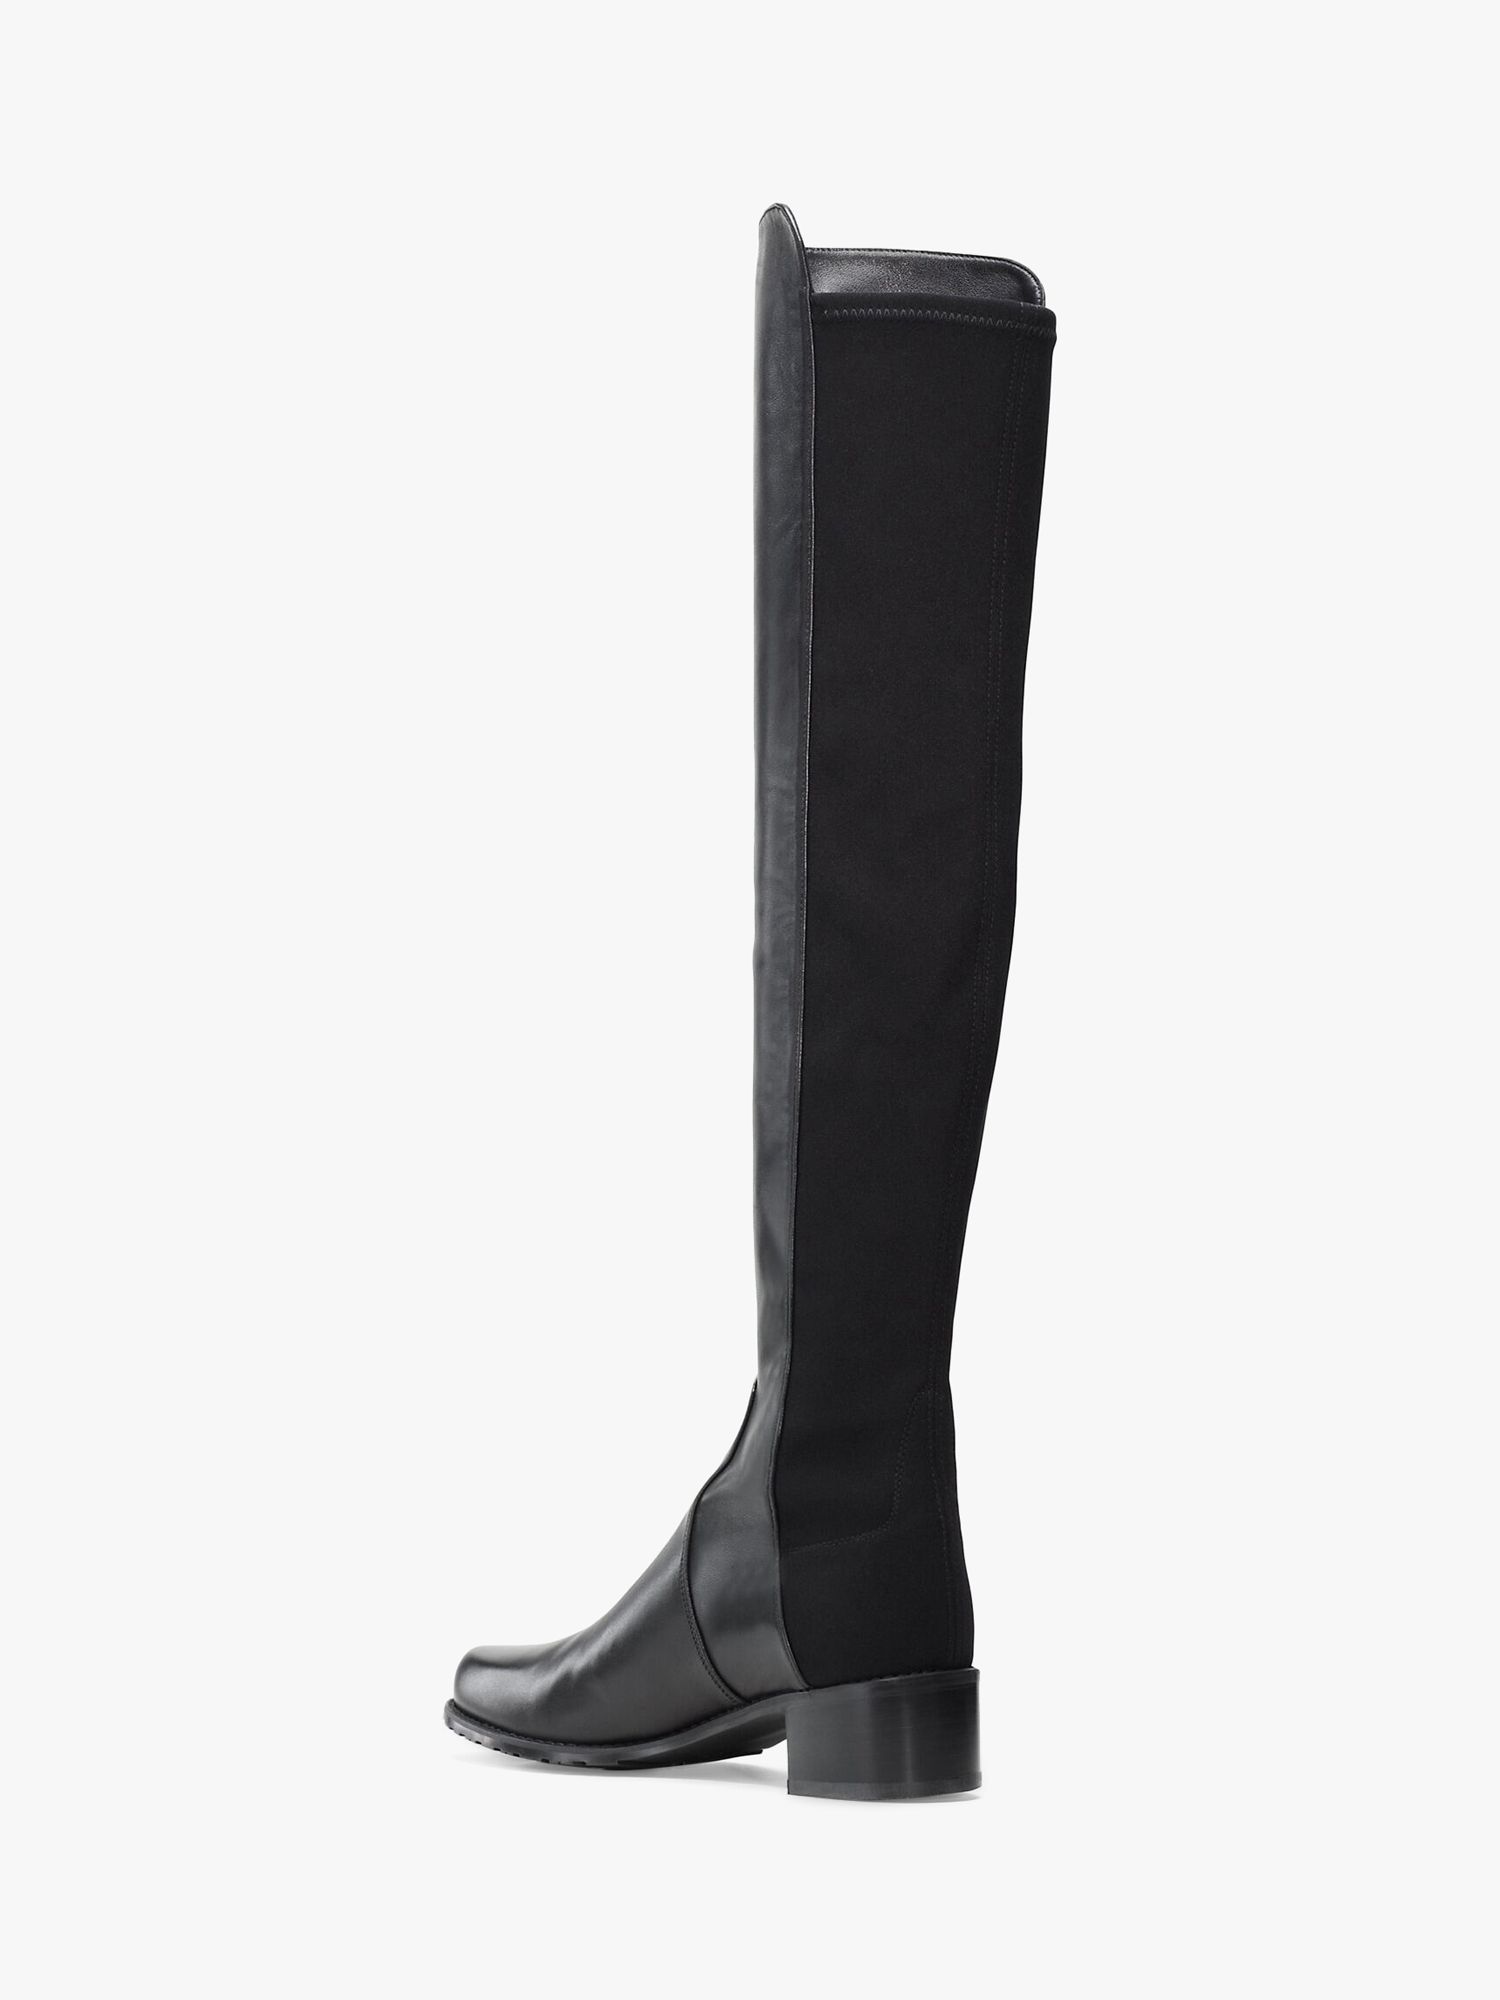 Stuart Weitzman Reserve Leather Over The Knee Boots, Black at John ...